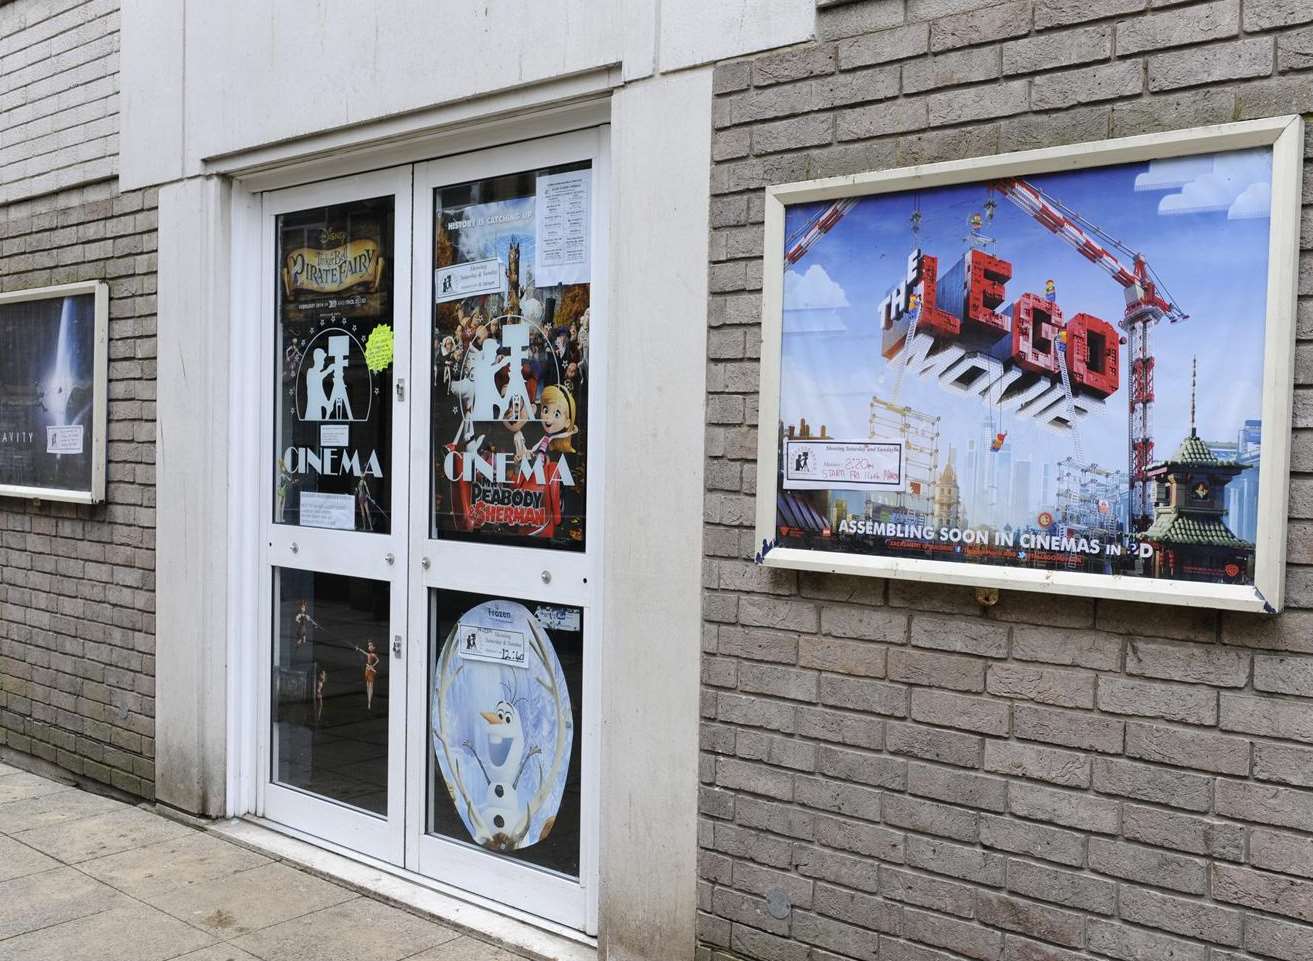 Dover's Silver Screen cinema finally gets the upgrade it needs